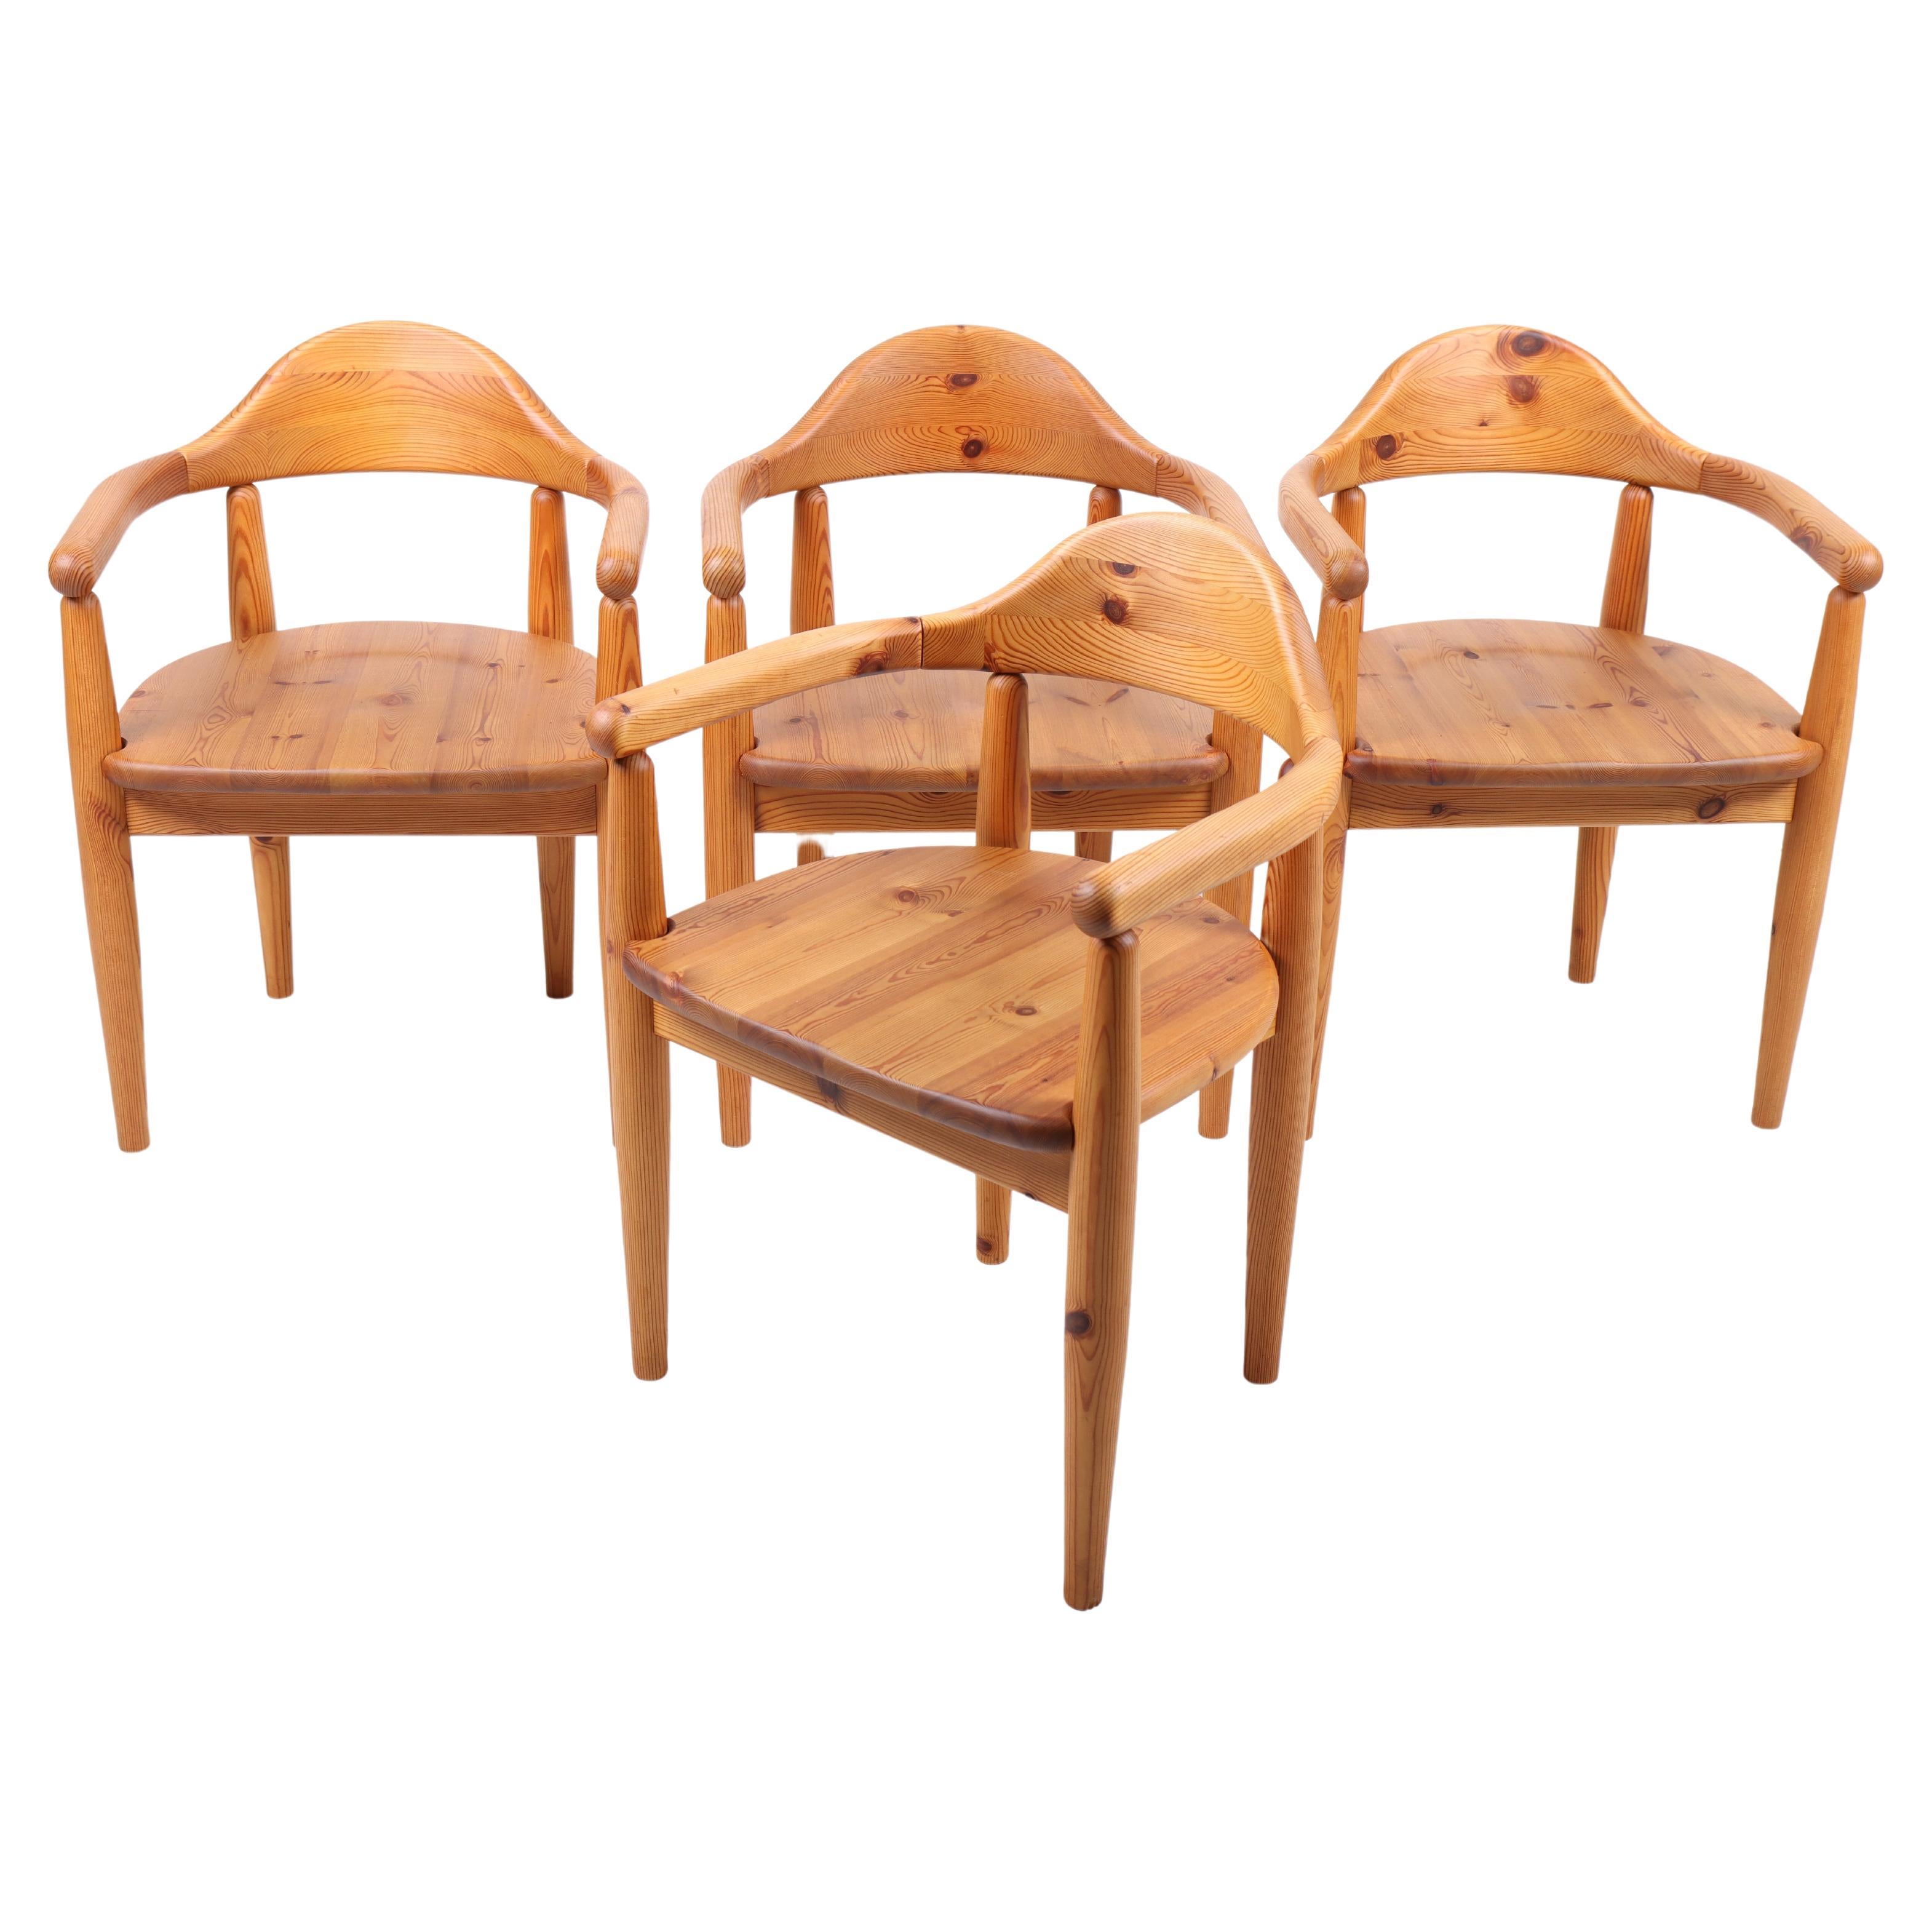 Set of Four Scandinavian Dining Chairs in Solid Pine, 1970s For Sale